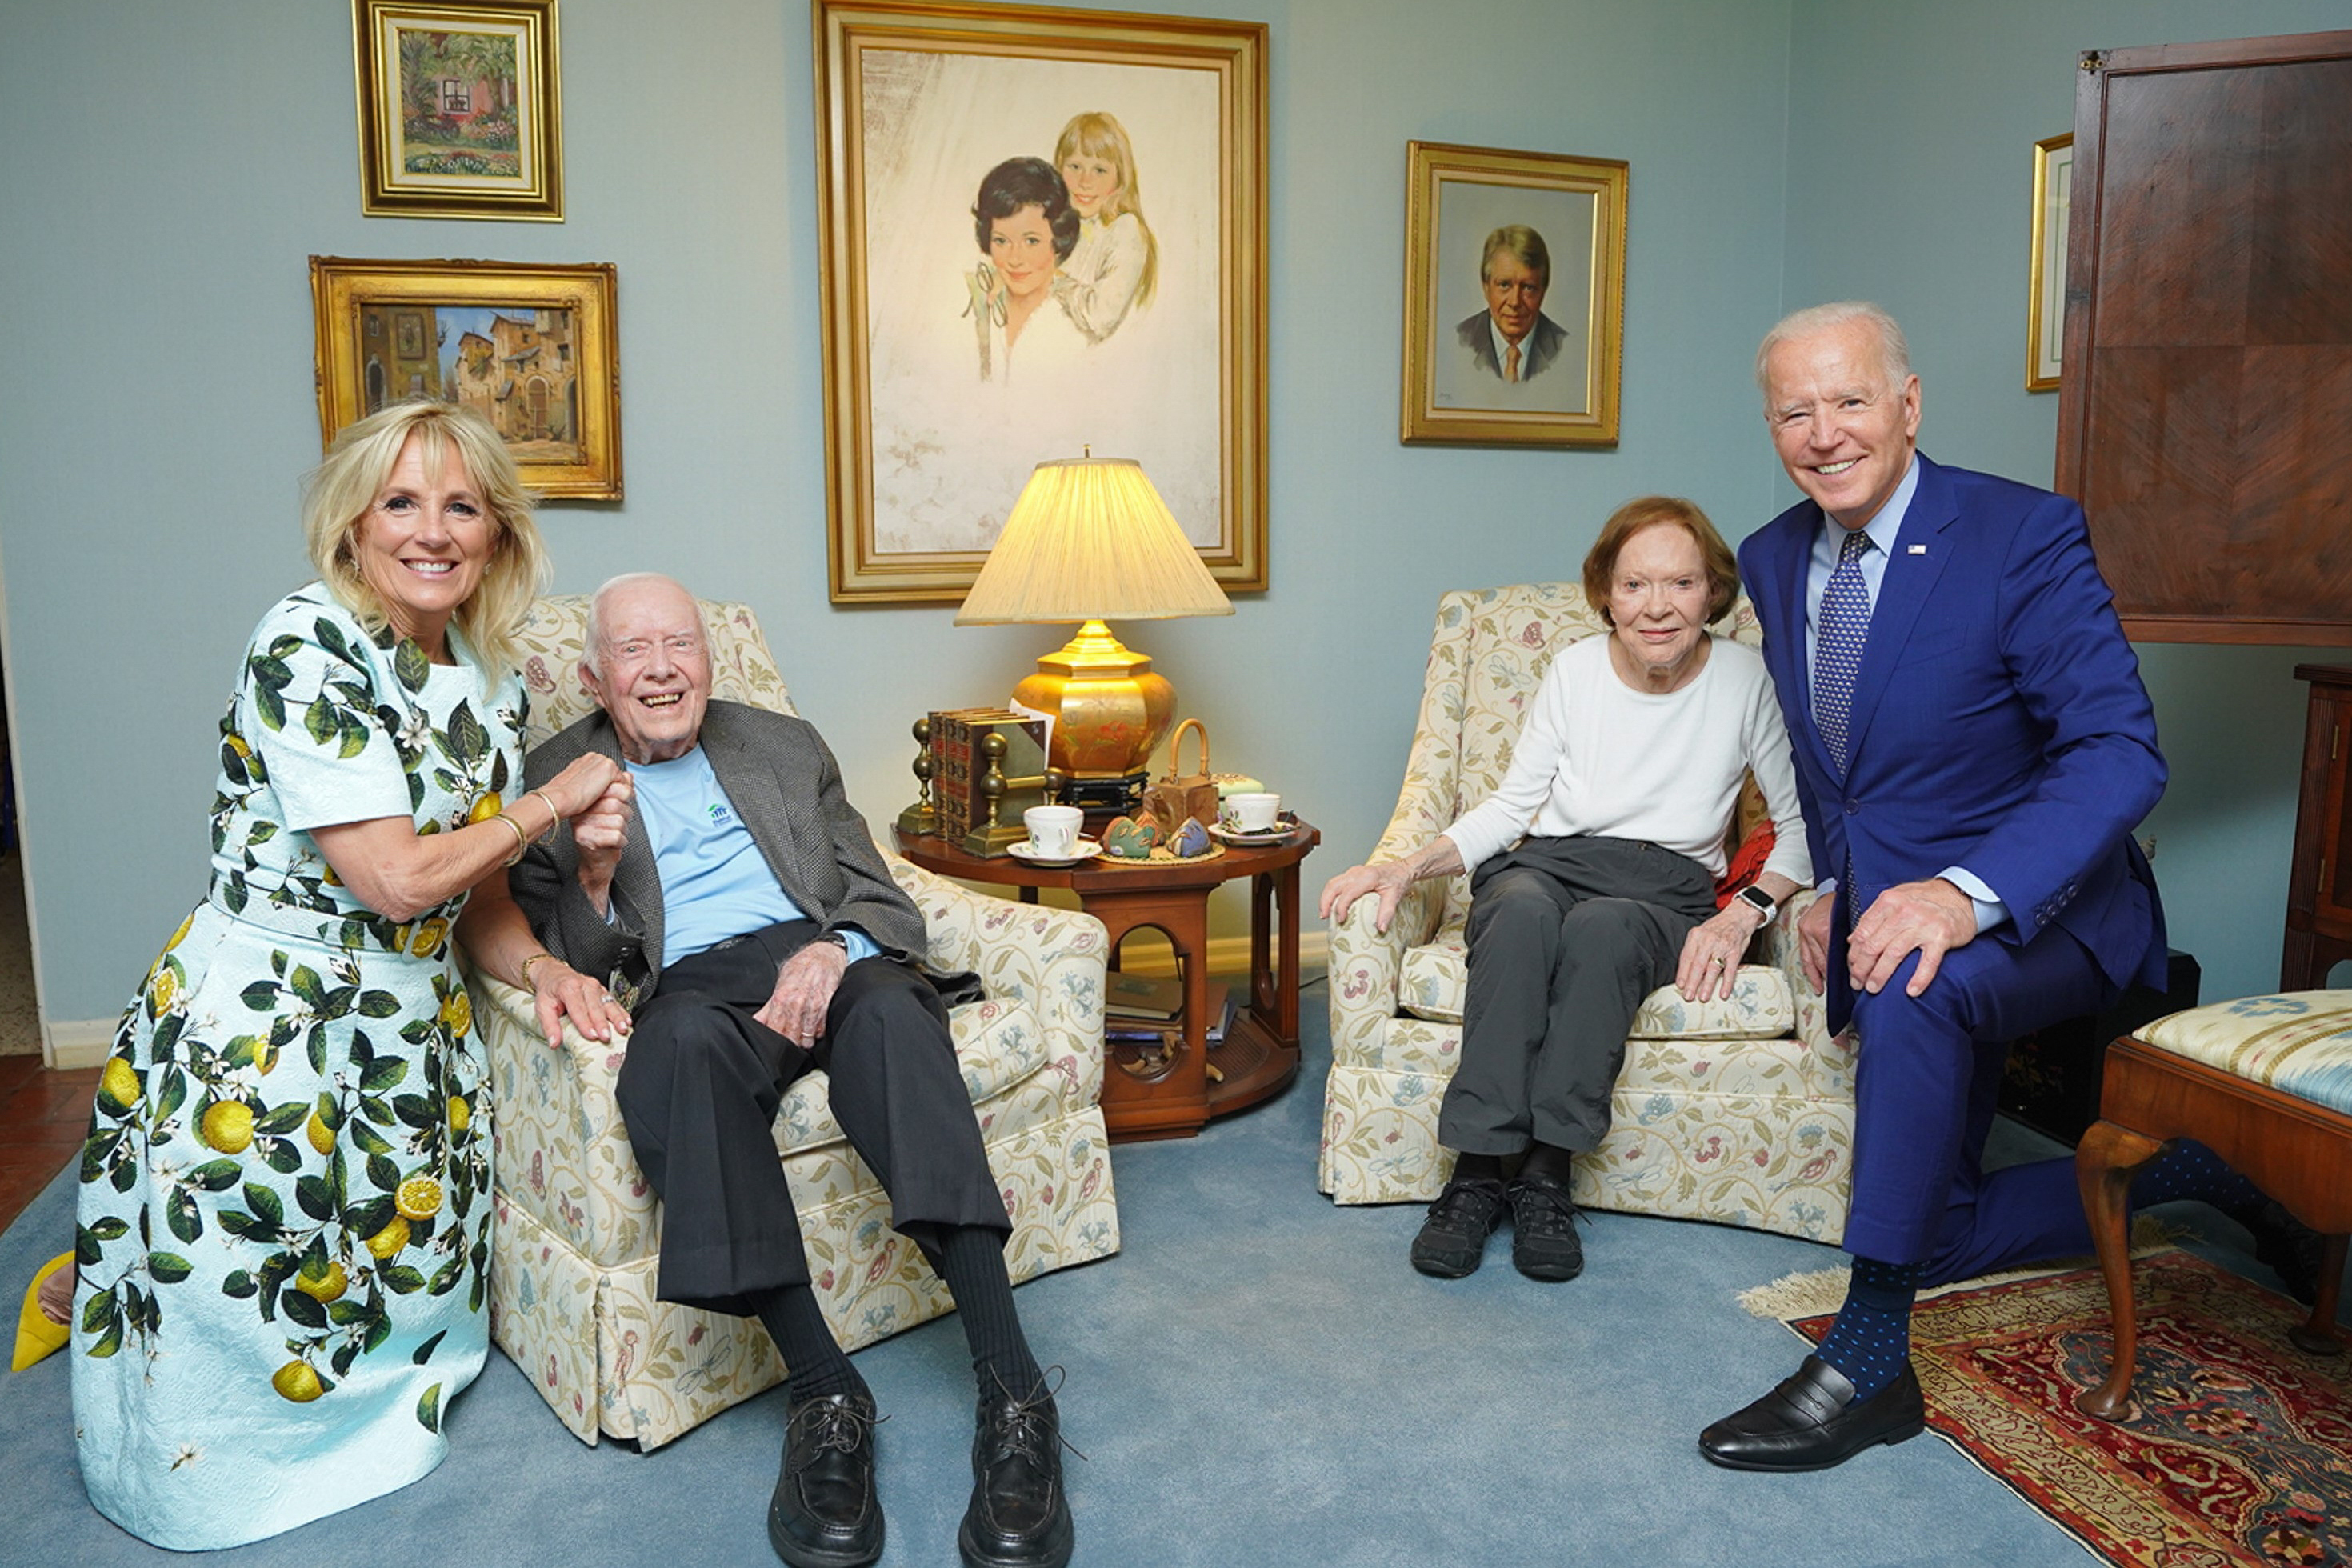 Smiling Jimmy Carter seen in photo from recent Biden visit to Georgia